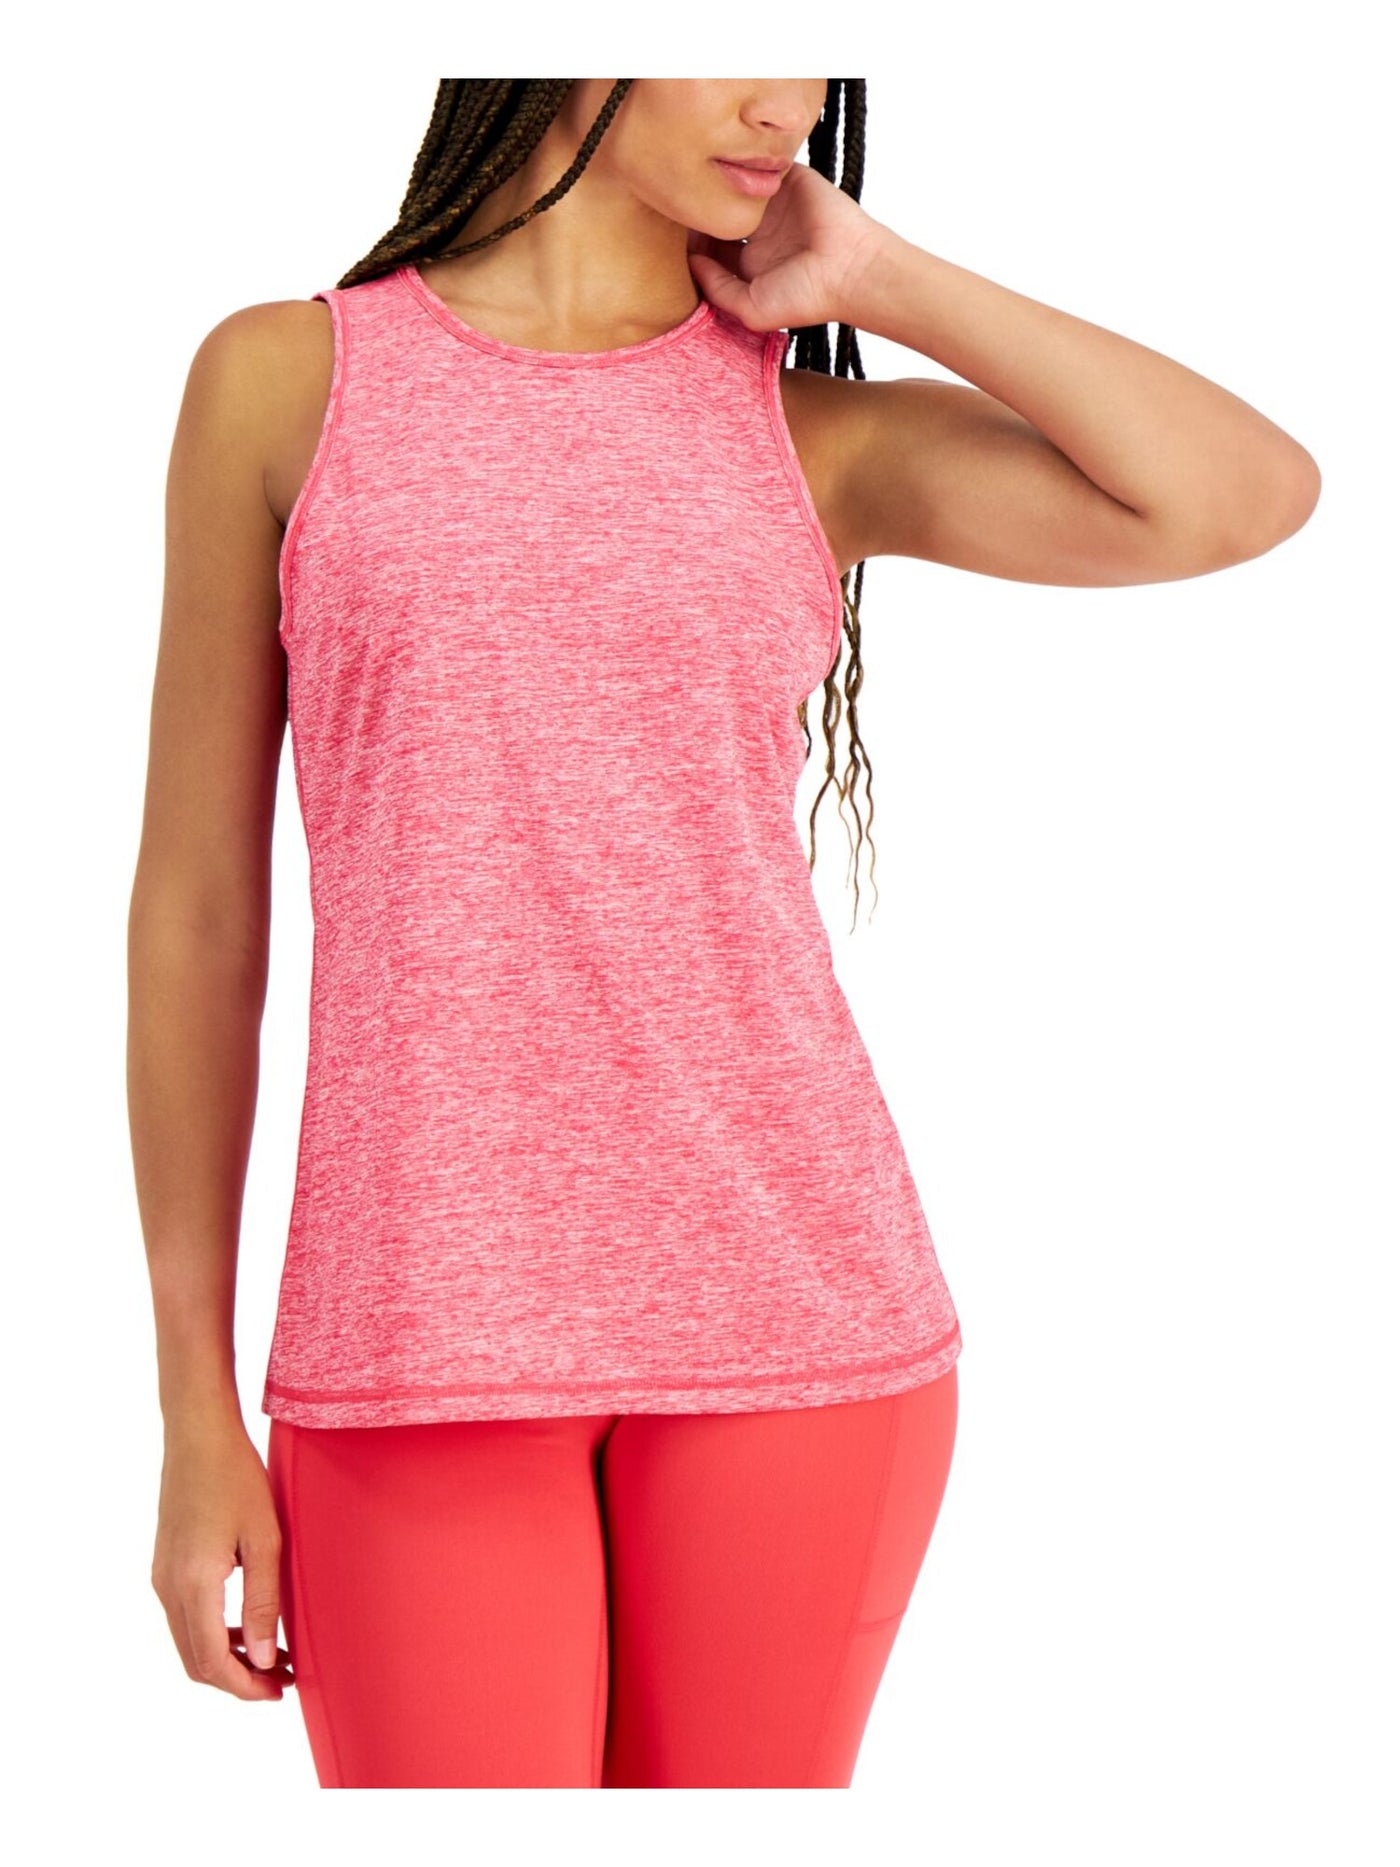 IDEOLOGY Womens Pink Stretch Moisture Wicking Flat Seems Cut Out Back Heather Sleeveless Round Neck Active Wear Top S